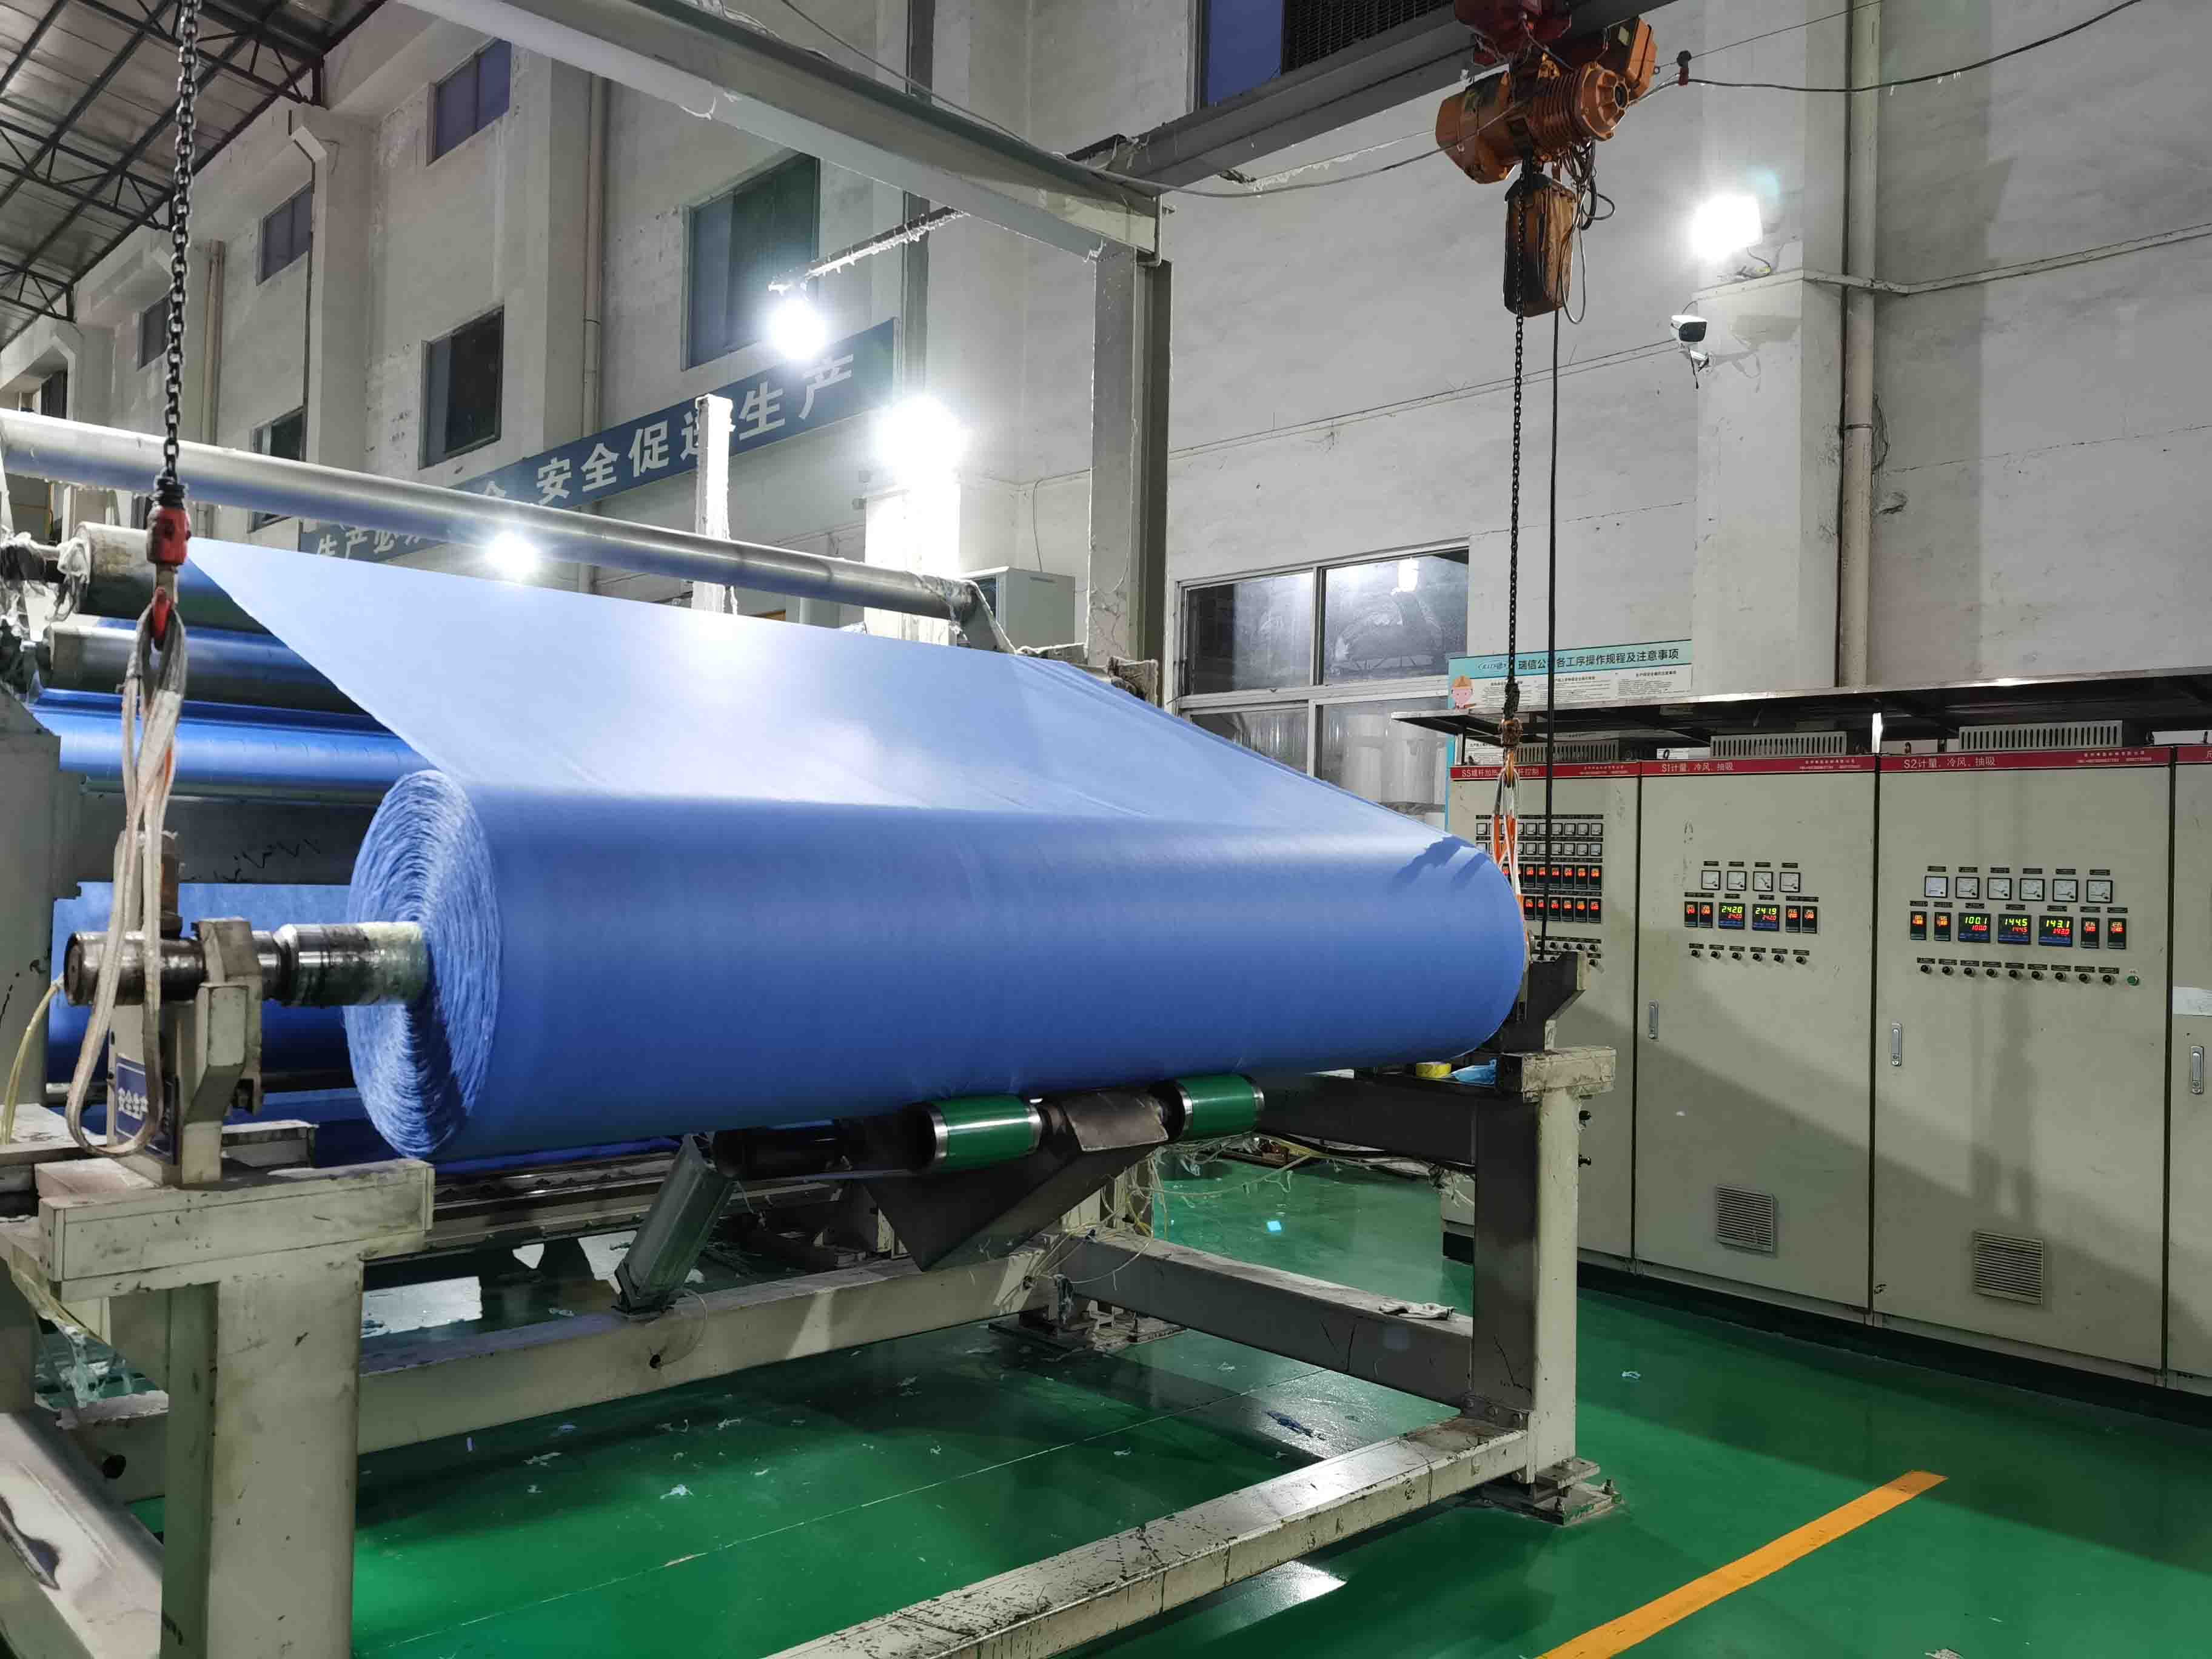 news-rayson nonwoven-Rayson SMS non-woven production line was successfully put into production-img